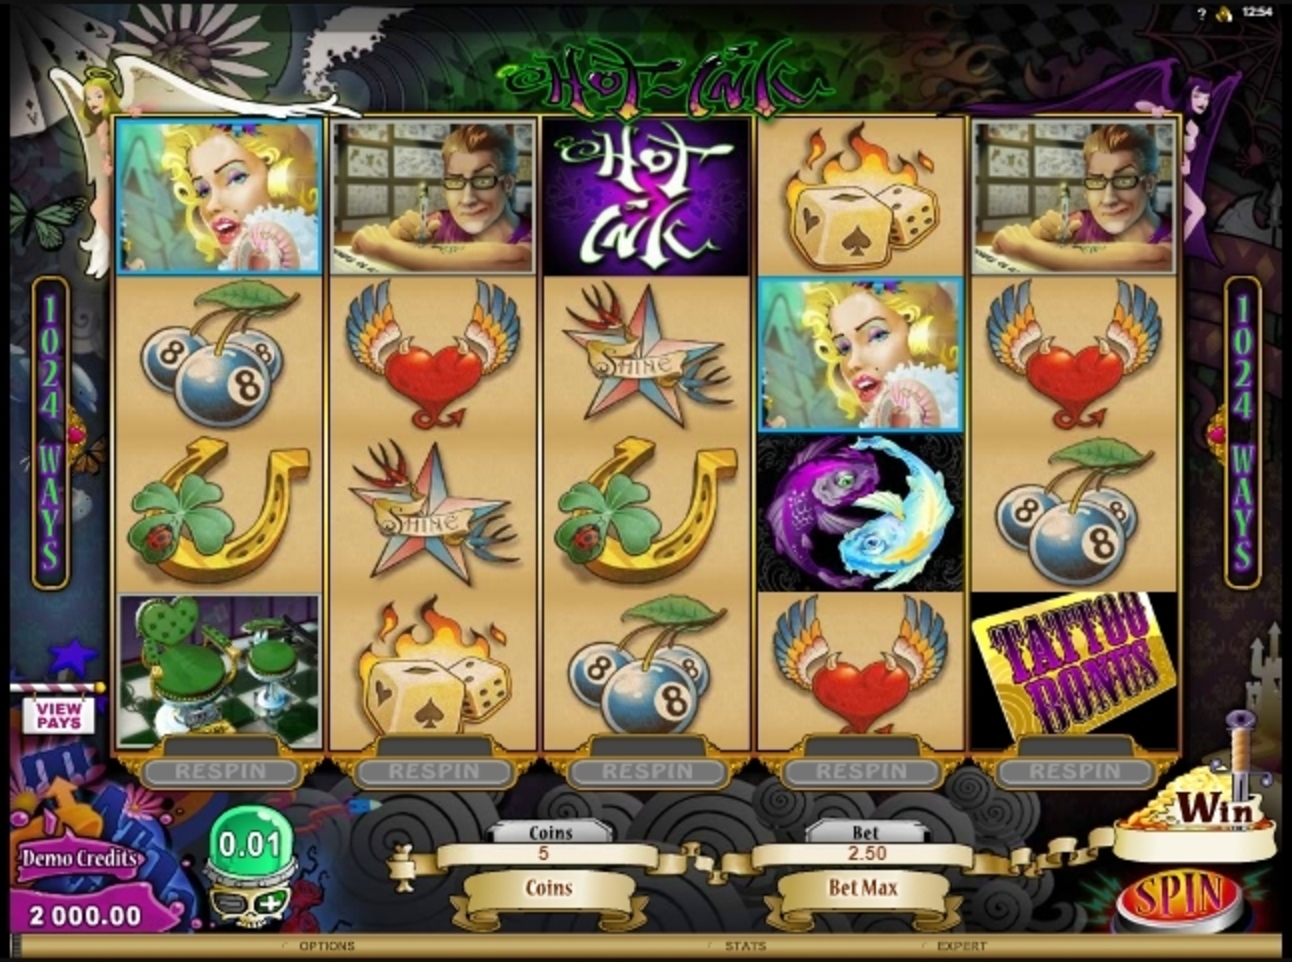 Reels in Hot Ink Slot Game by Microgaming